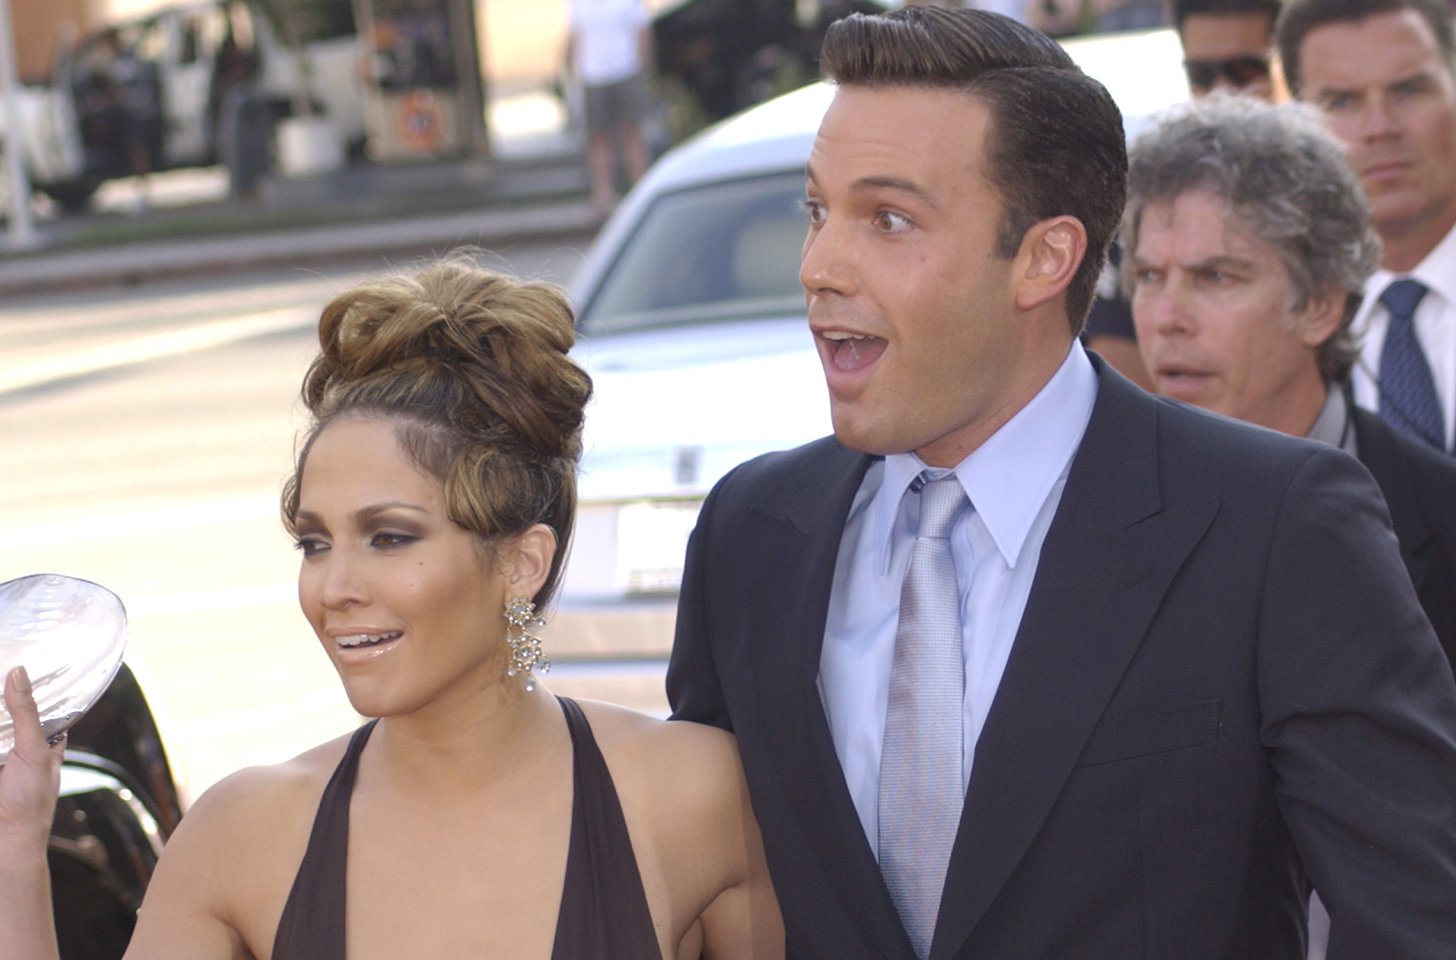 The Truth About Ben Affleck And Jennifer Lopez's Reunion